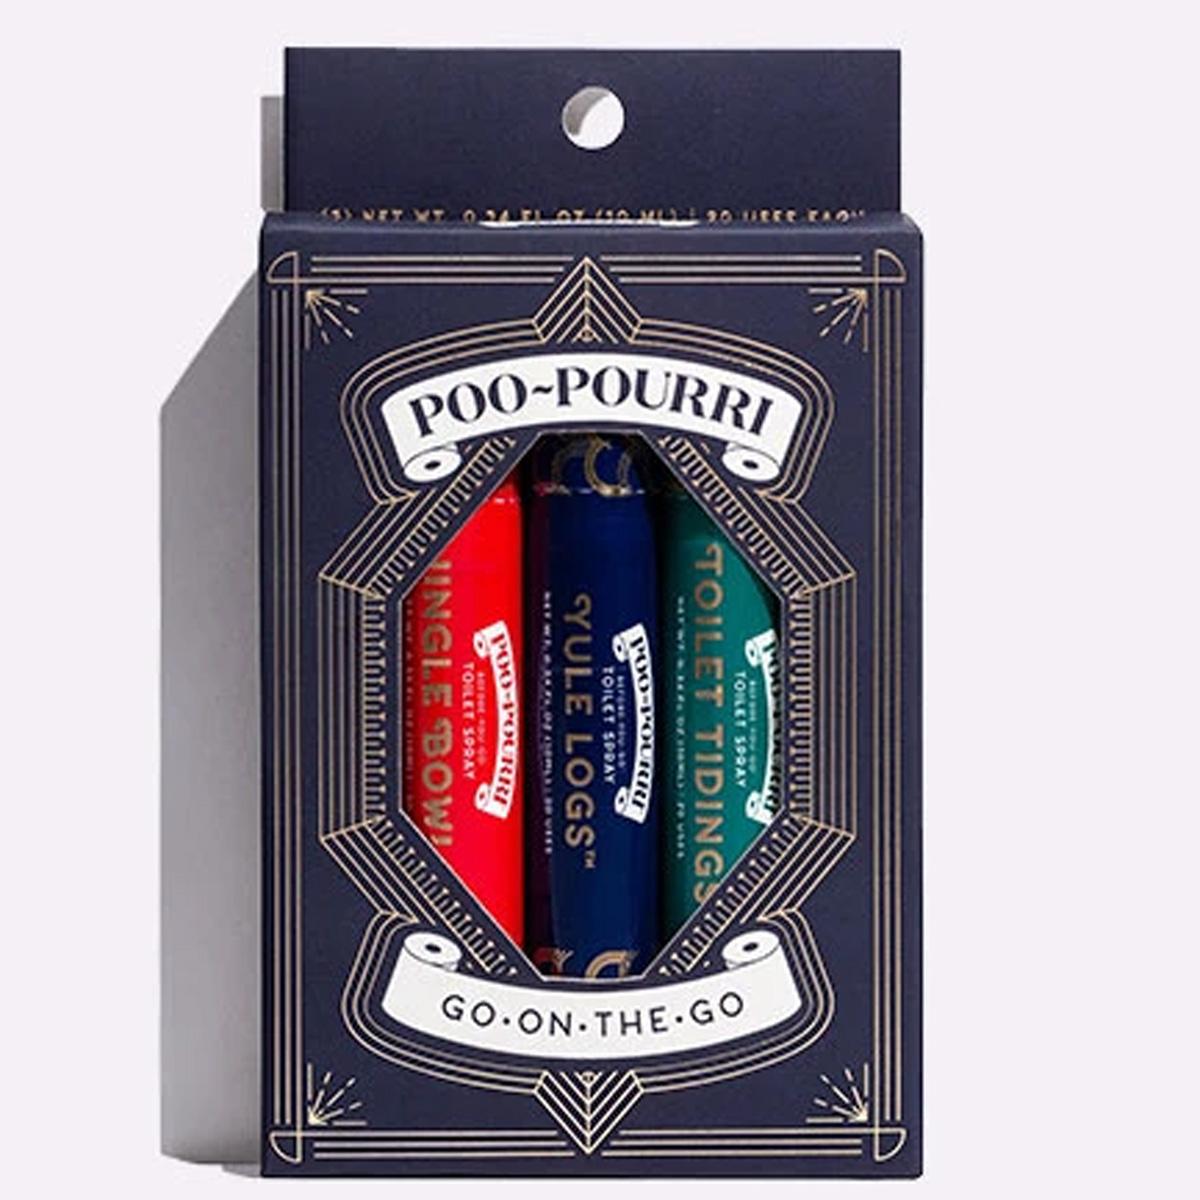 Poo Pourri Holiday Go-On-The-Go Set for $6.97 Shipped